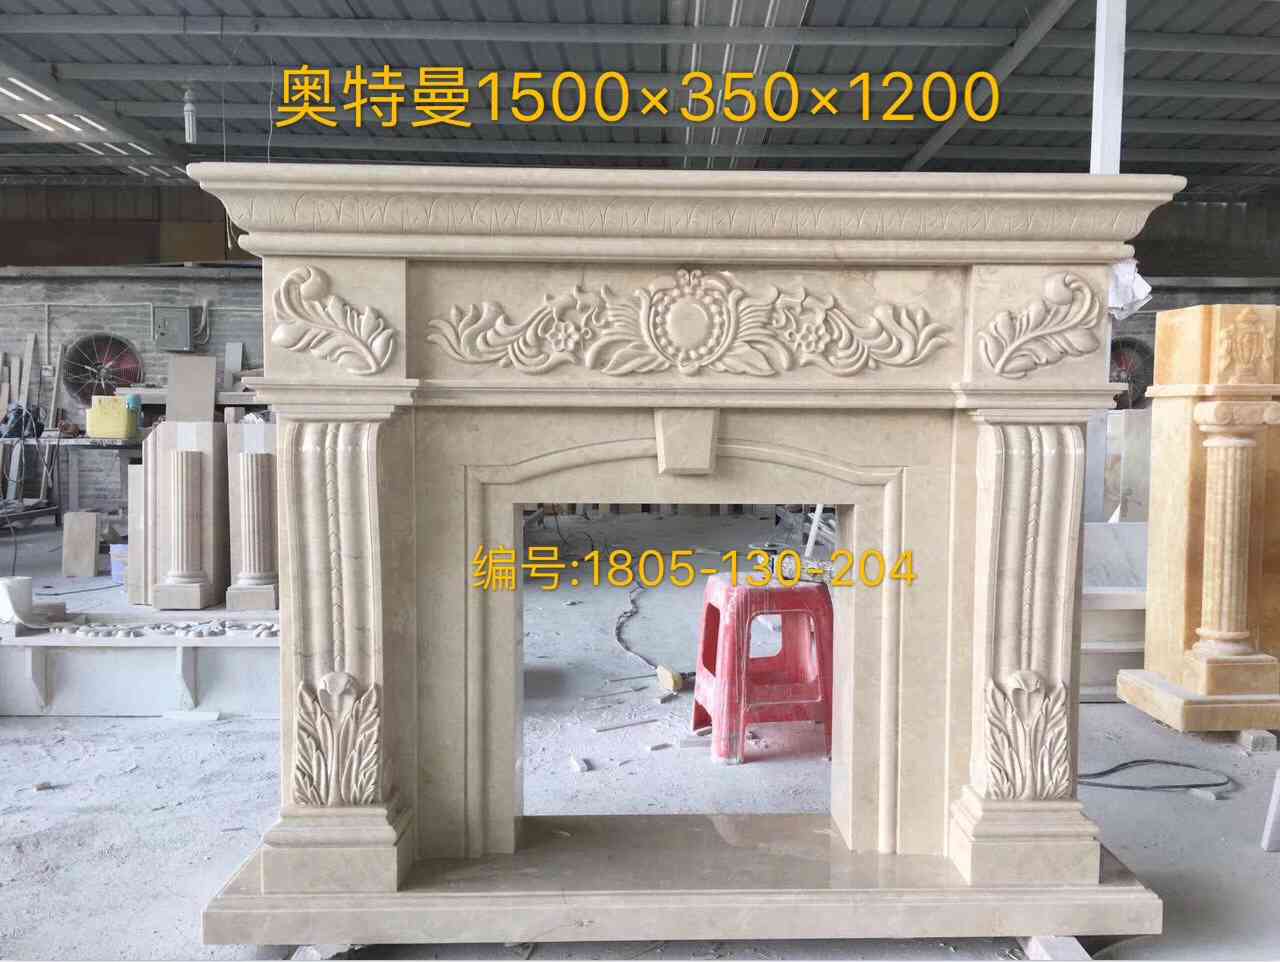 antique fireplace,gas fireplace conversion,fireplaces for sale near me,the fireplace shop,fireplace world,home gas fireplaces,inside fireplace,where to buy fireplace